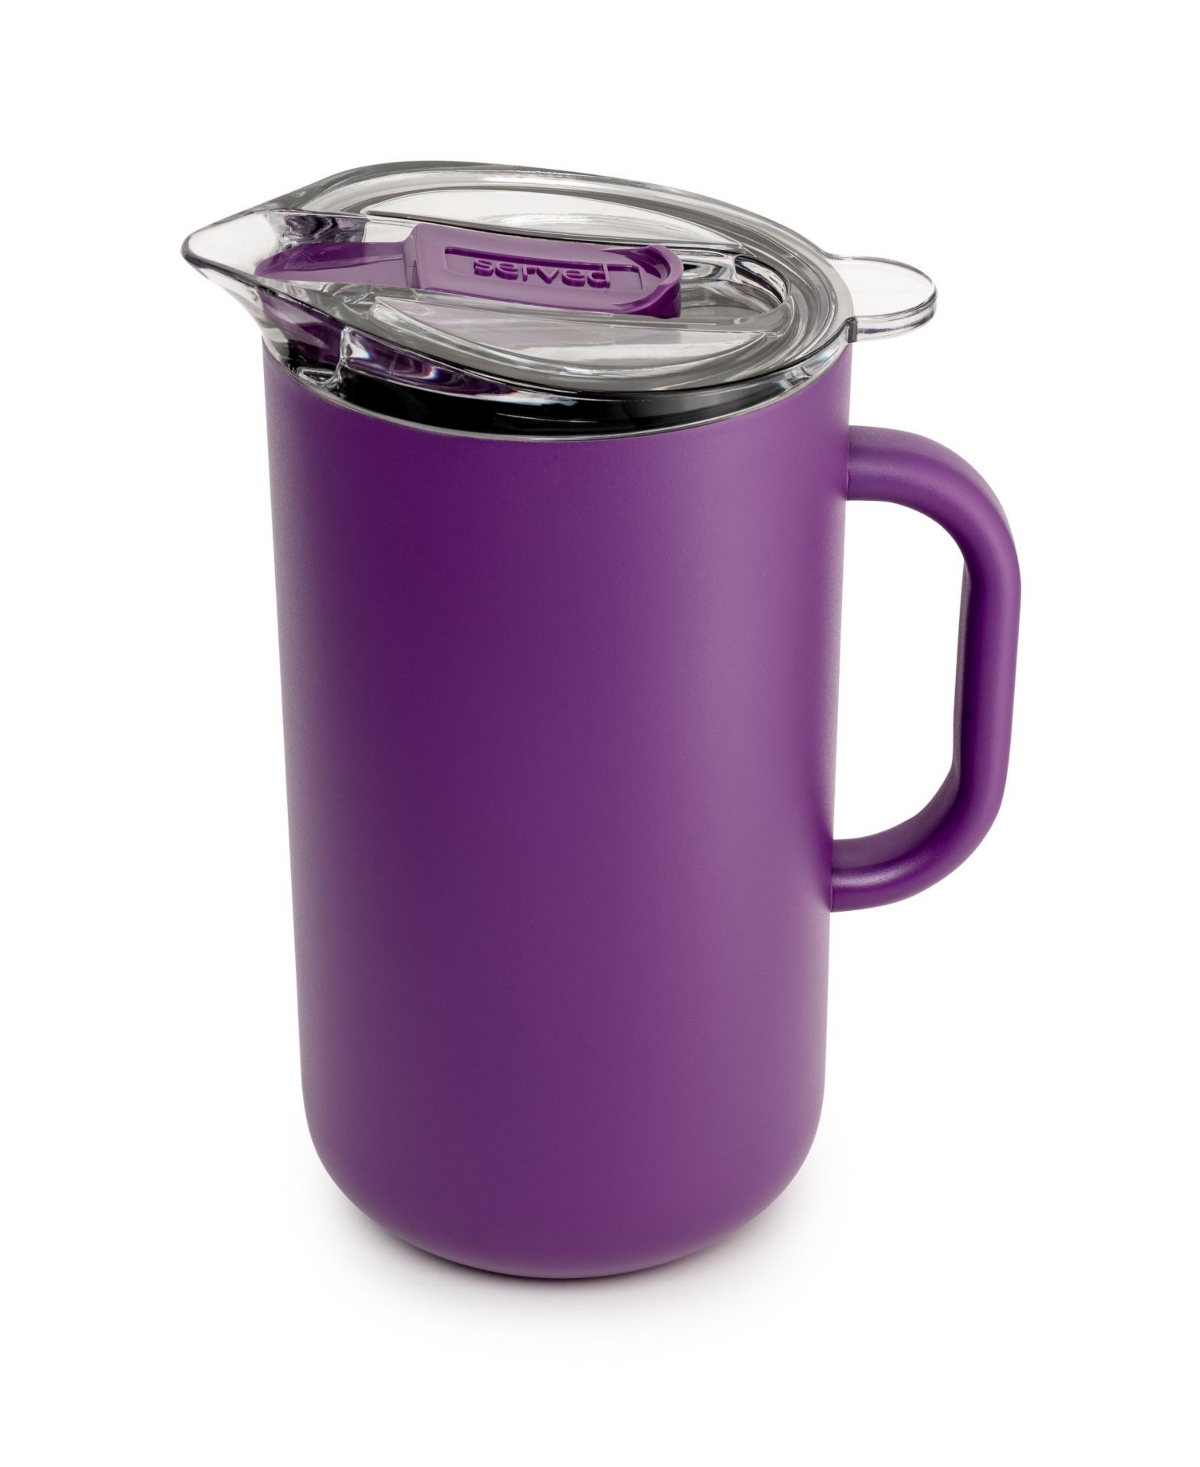 Served Vacuum-insulated Double-walled Copper-lined Stainless Steel Pitcher, 2 Liter In Grape